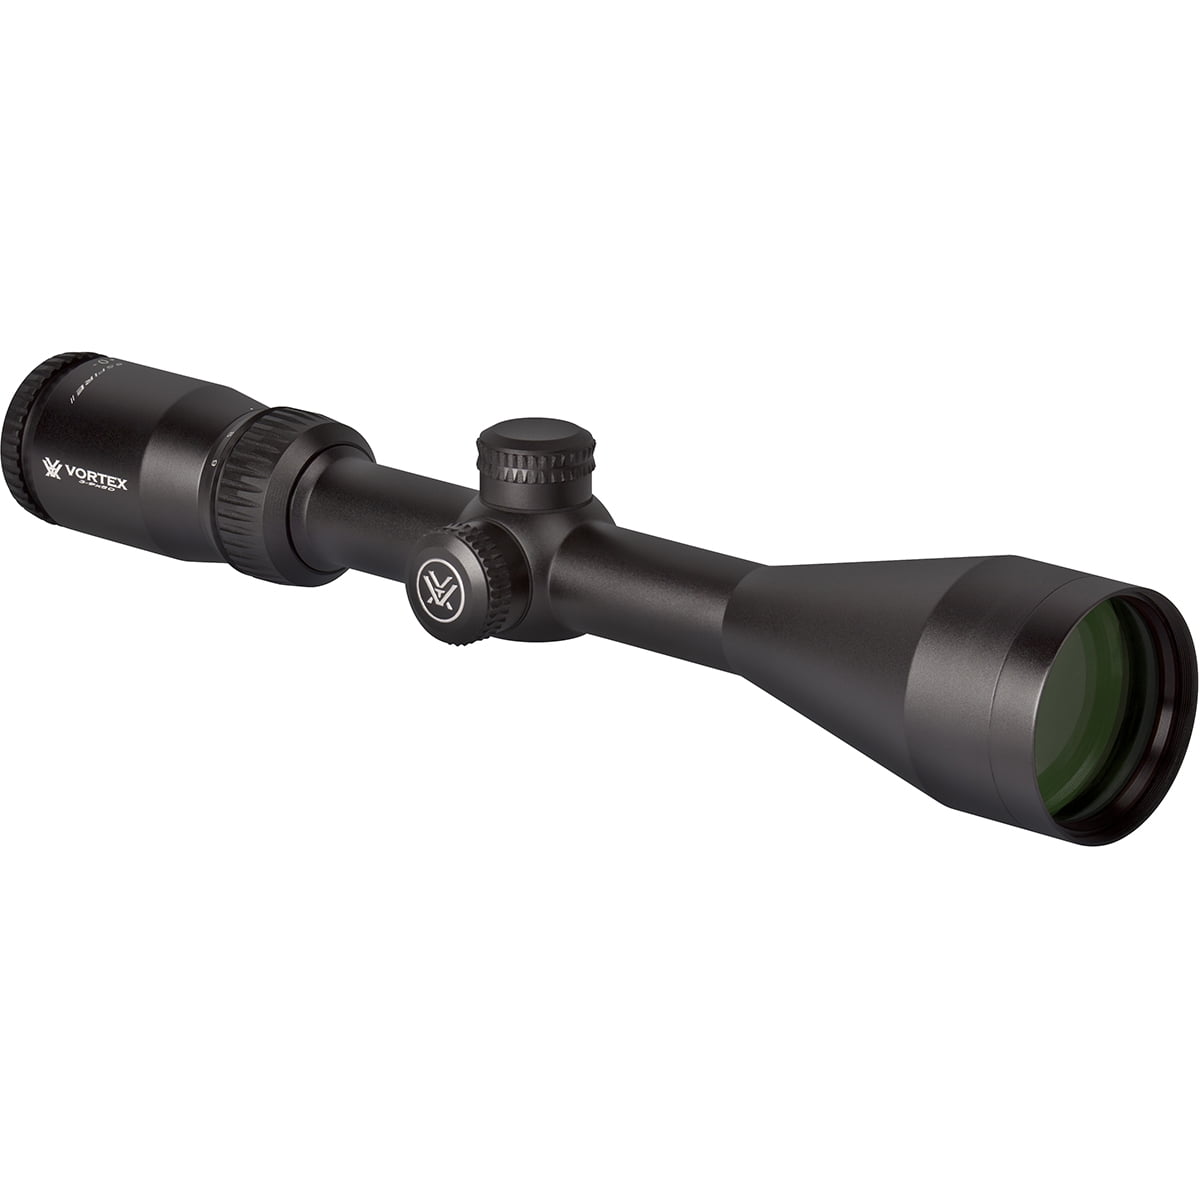 Bushnell 753950 Trophy 3-9x 50mm Multi-x Reticle Riflescope for sale online 